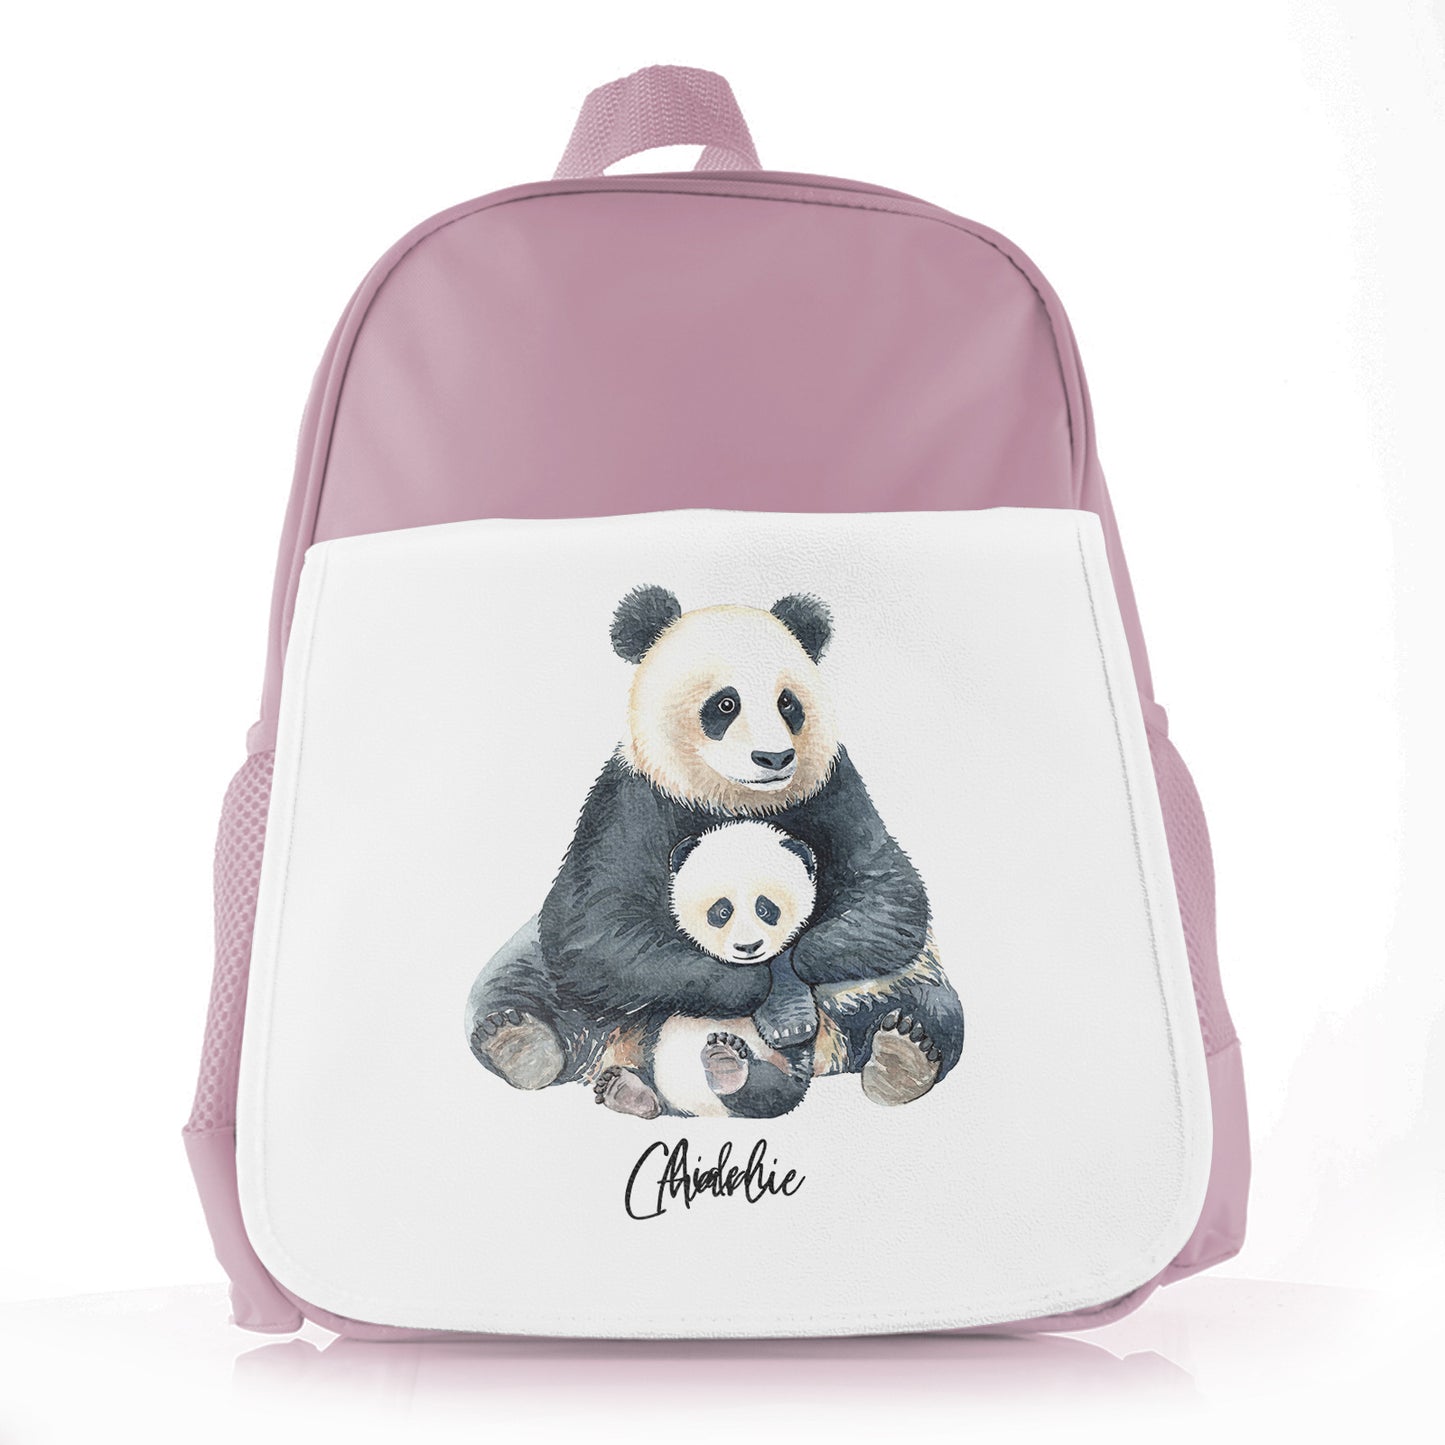 Personalised School Bag with Welcoming Text and Relaxing Mum and Baby Pandas